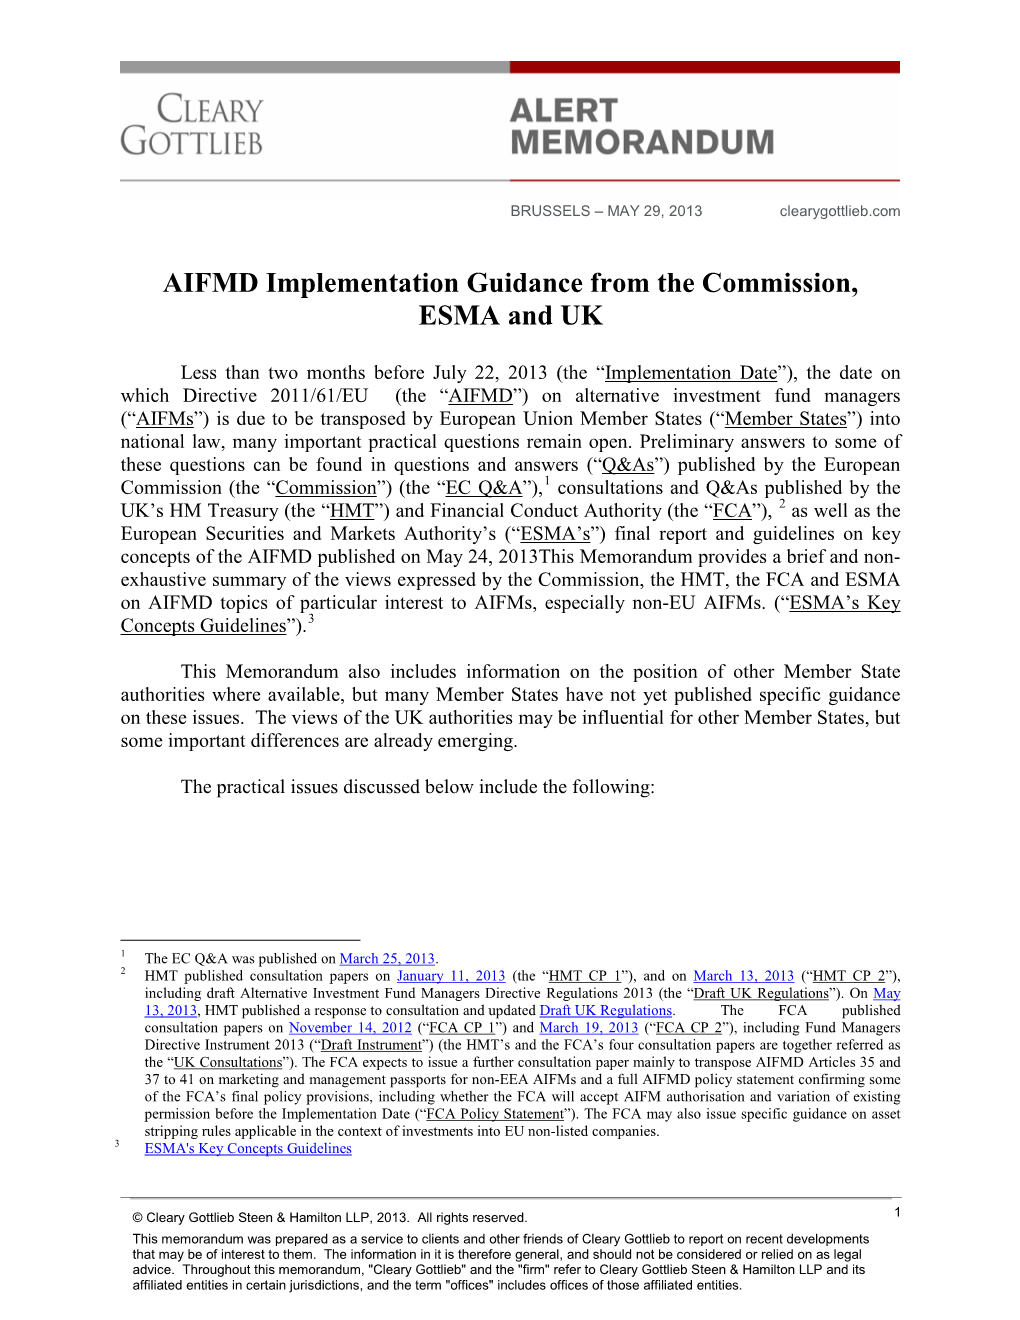 AIFMD Implementation Guidance from the Commission, ESMA and UK